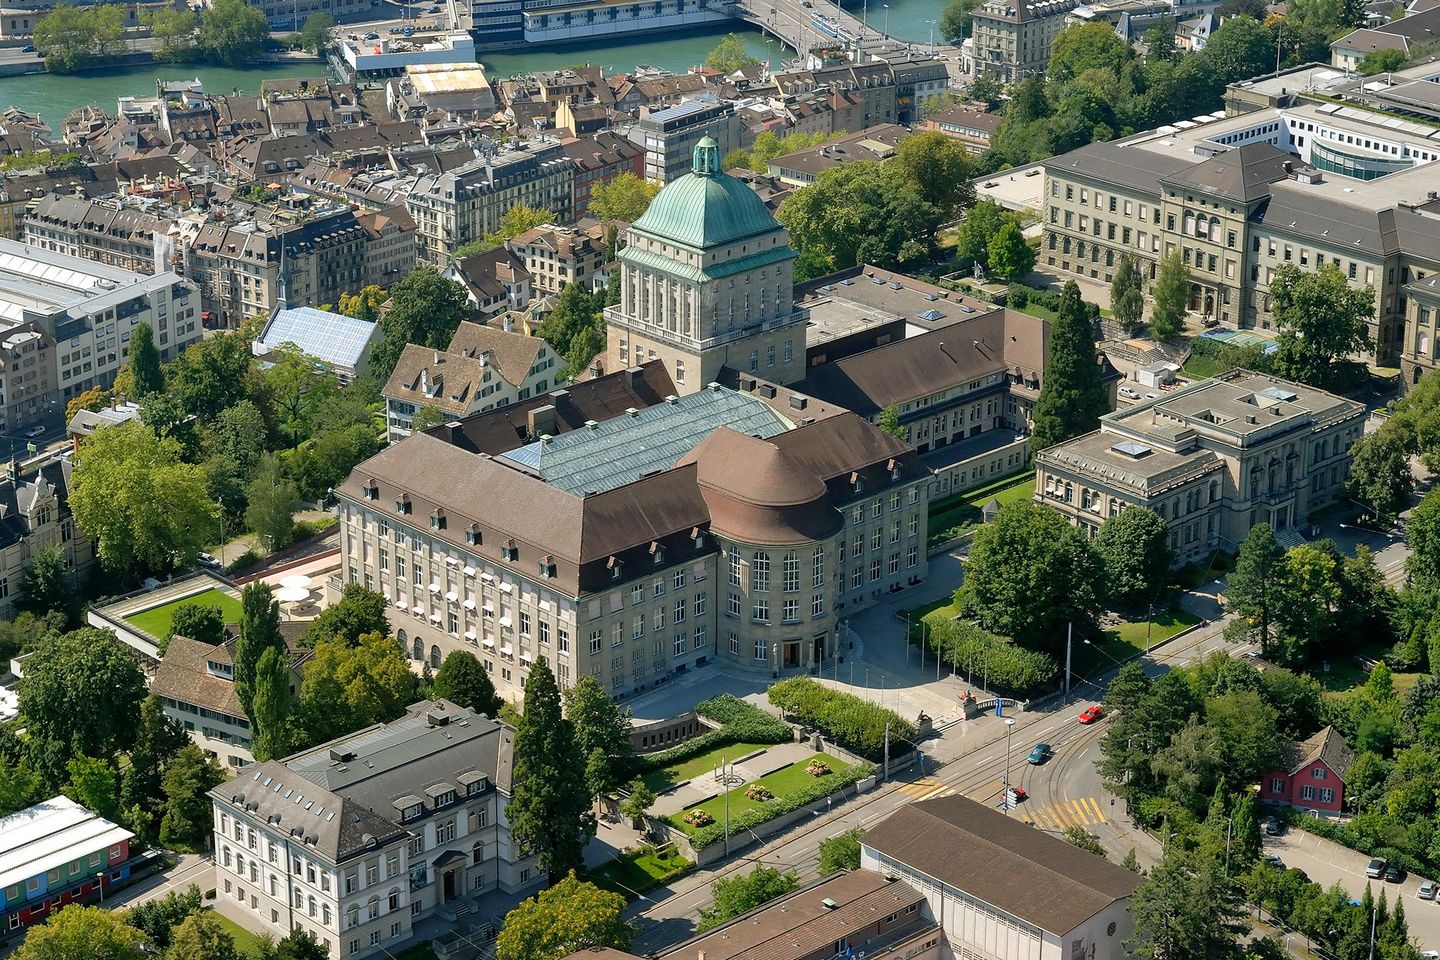 The picture shows the main building of the University of Zurich from above.